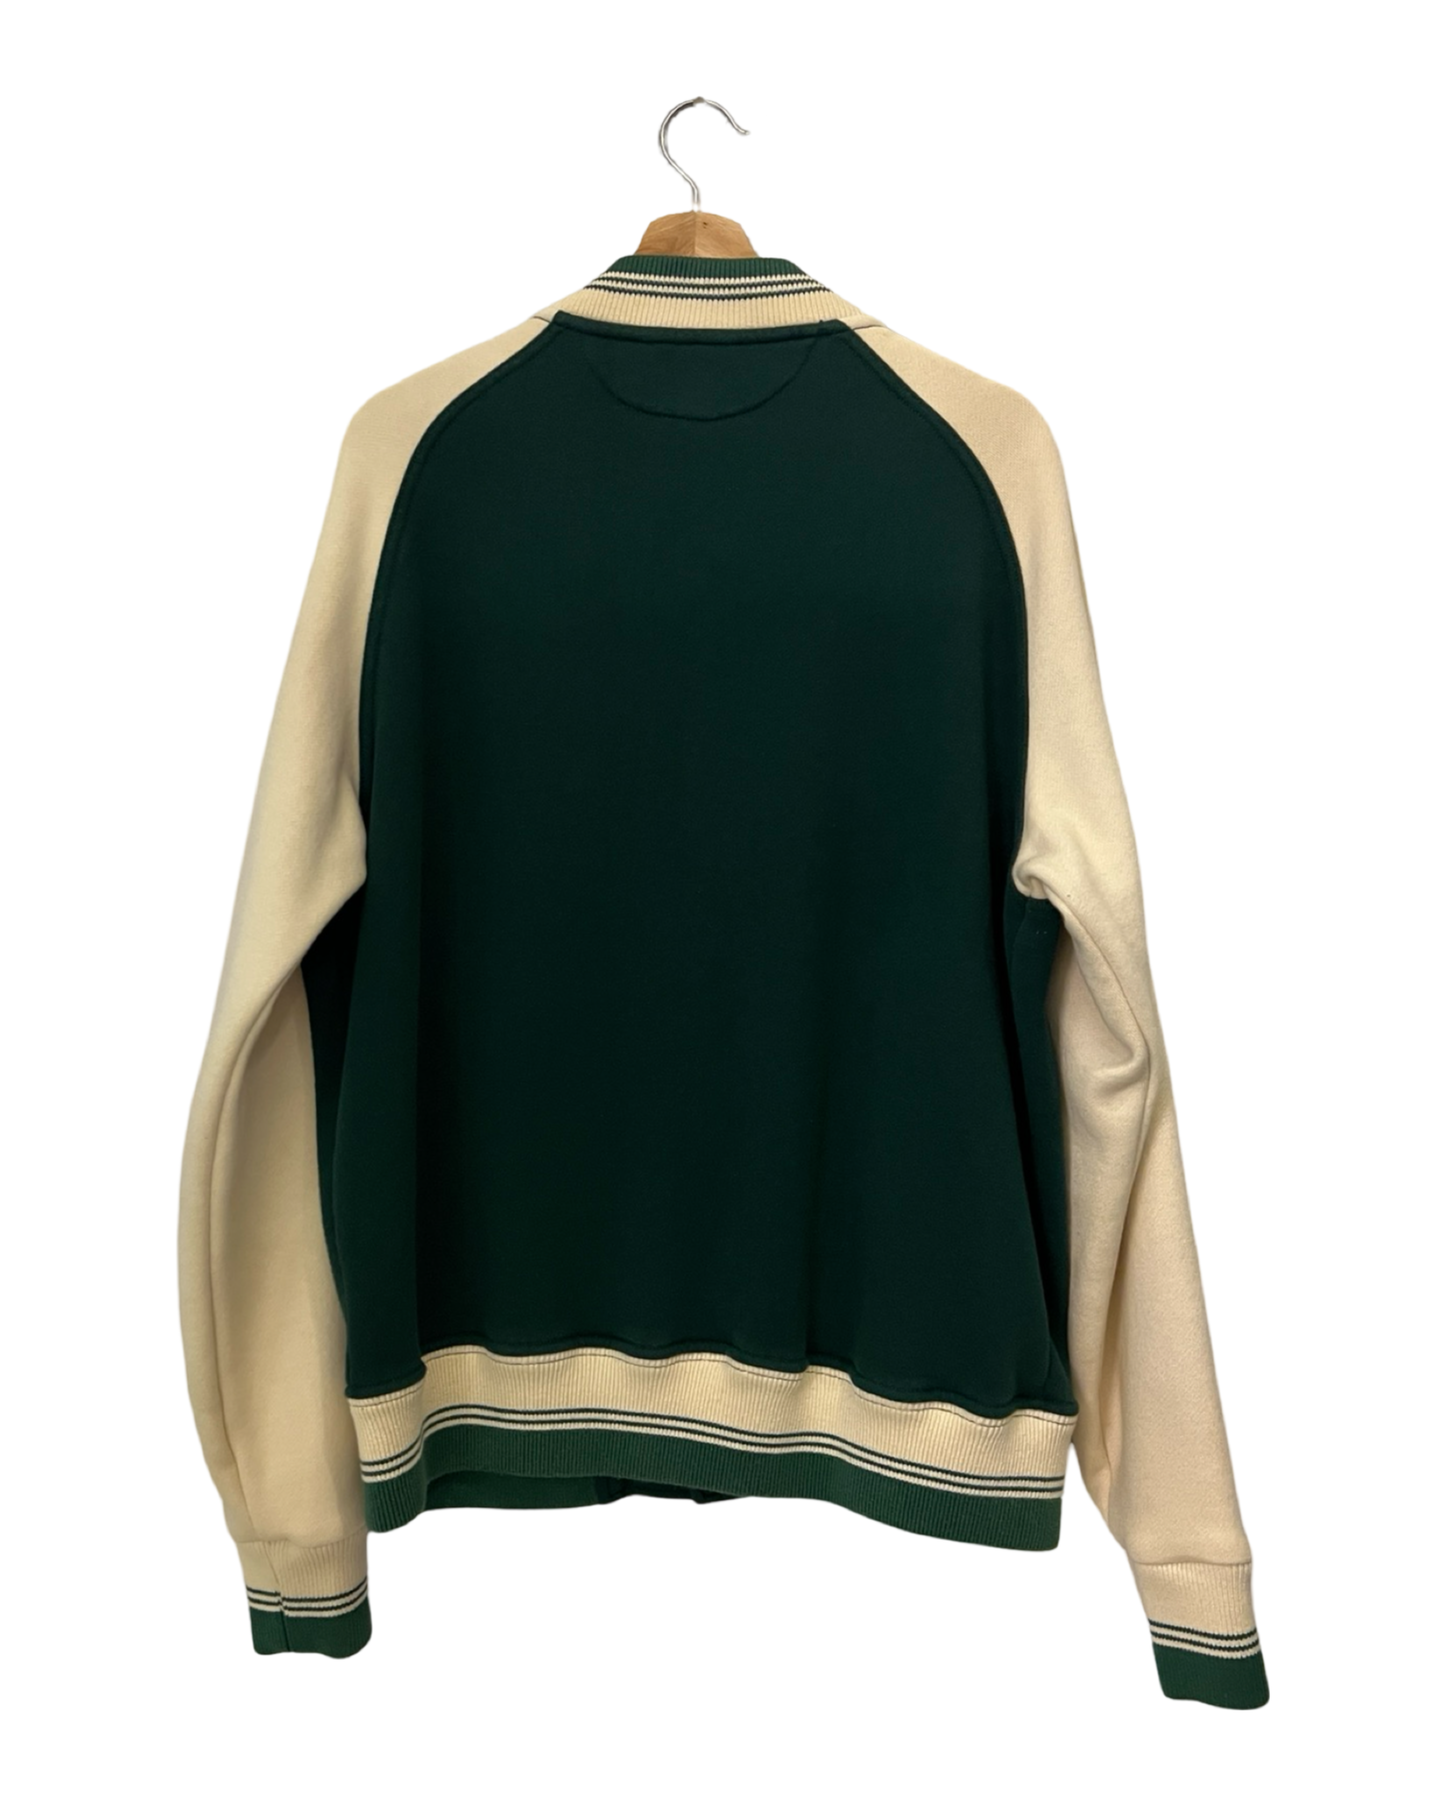 Archive Ralph Lauren Rugby 1957 Champs Varsity Polo Jacket